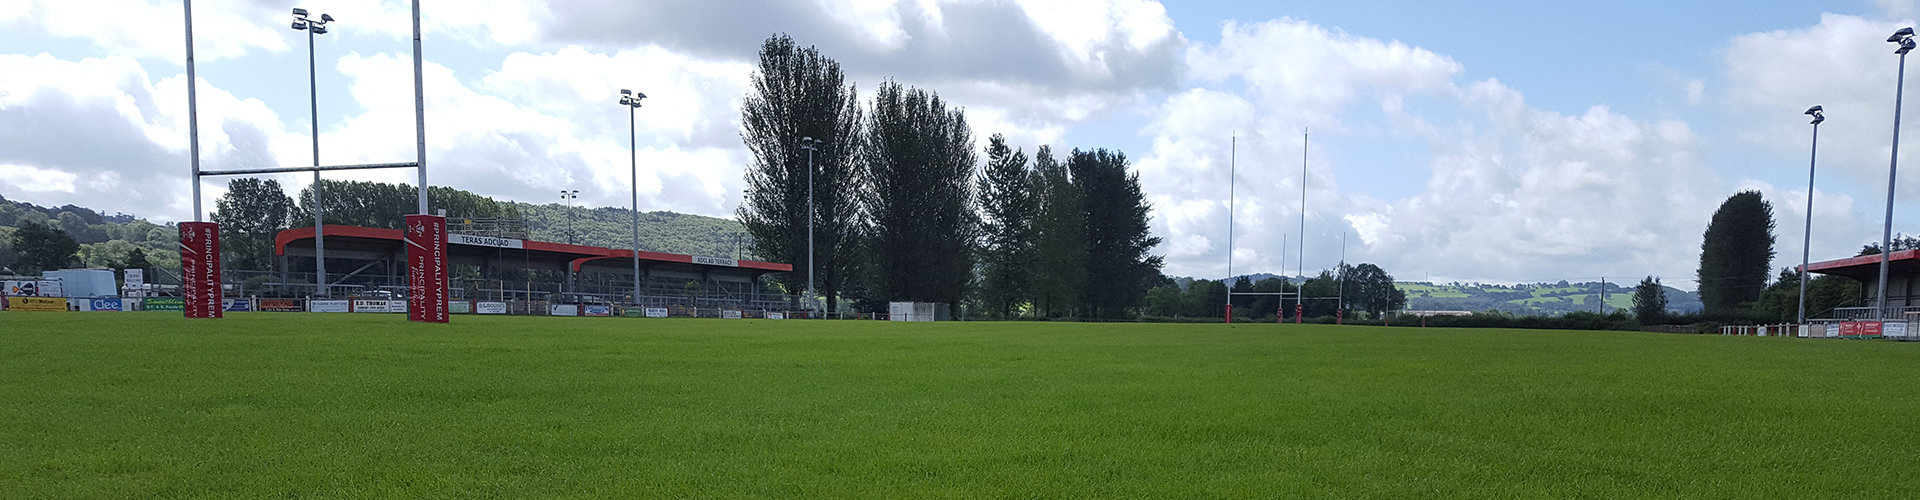 Welsh Rugby Union praises Grounds Training